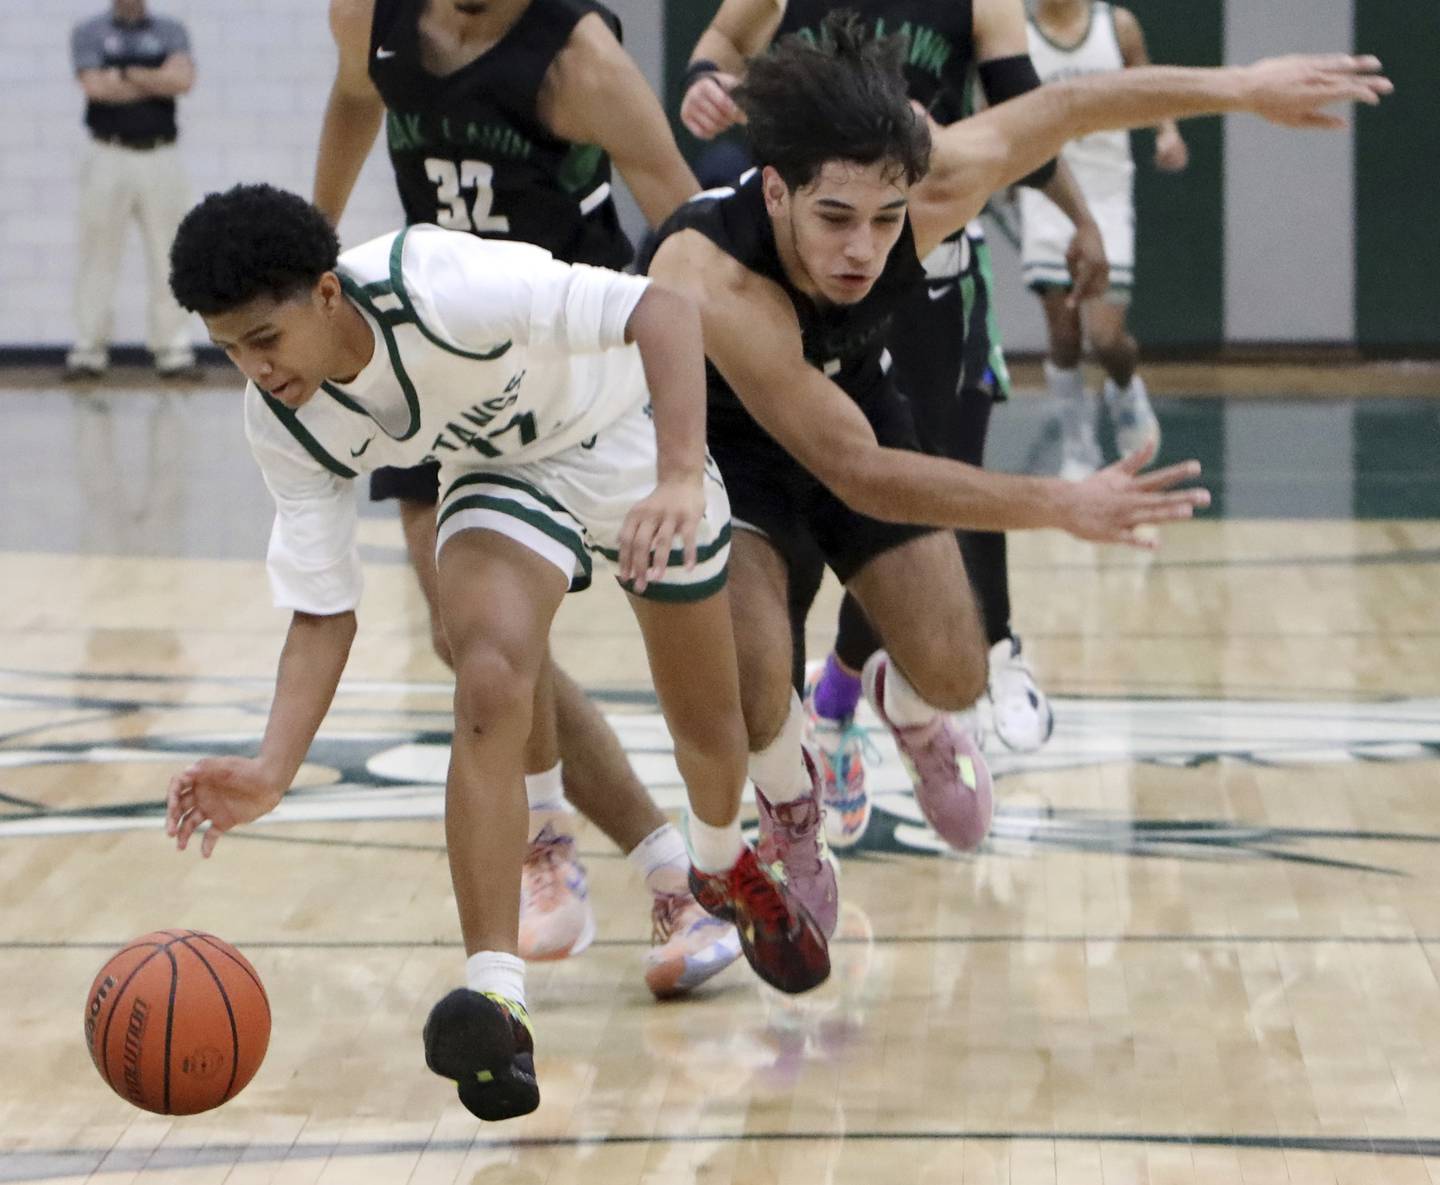 Evergreen Park's Ulises Cardenas, left, charges down court past Oak Lawn's Eduardo Chiquito during a South Suburban Red game in Evergreen Park on Thursday, Dec. 8, 2022.